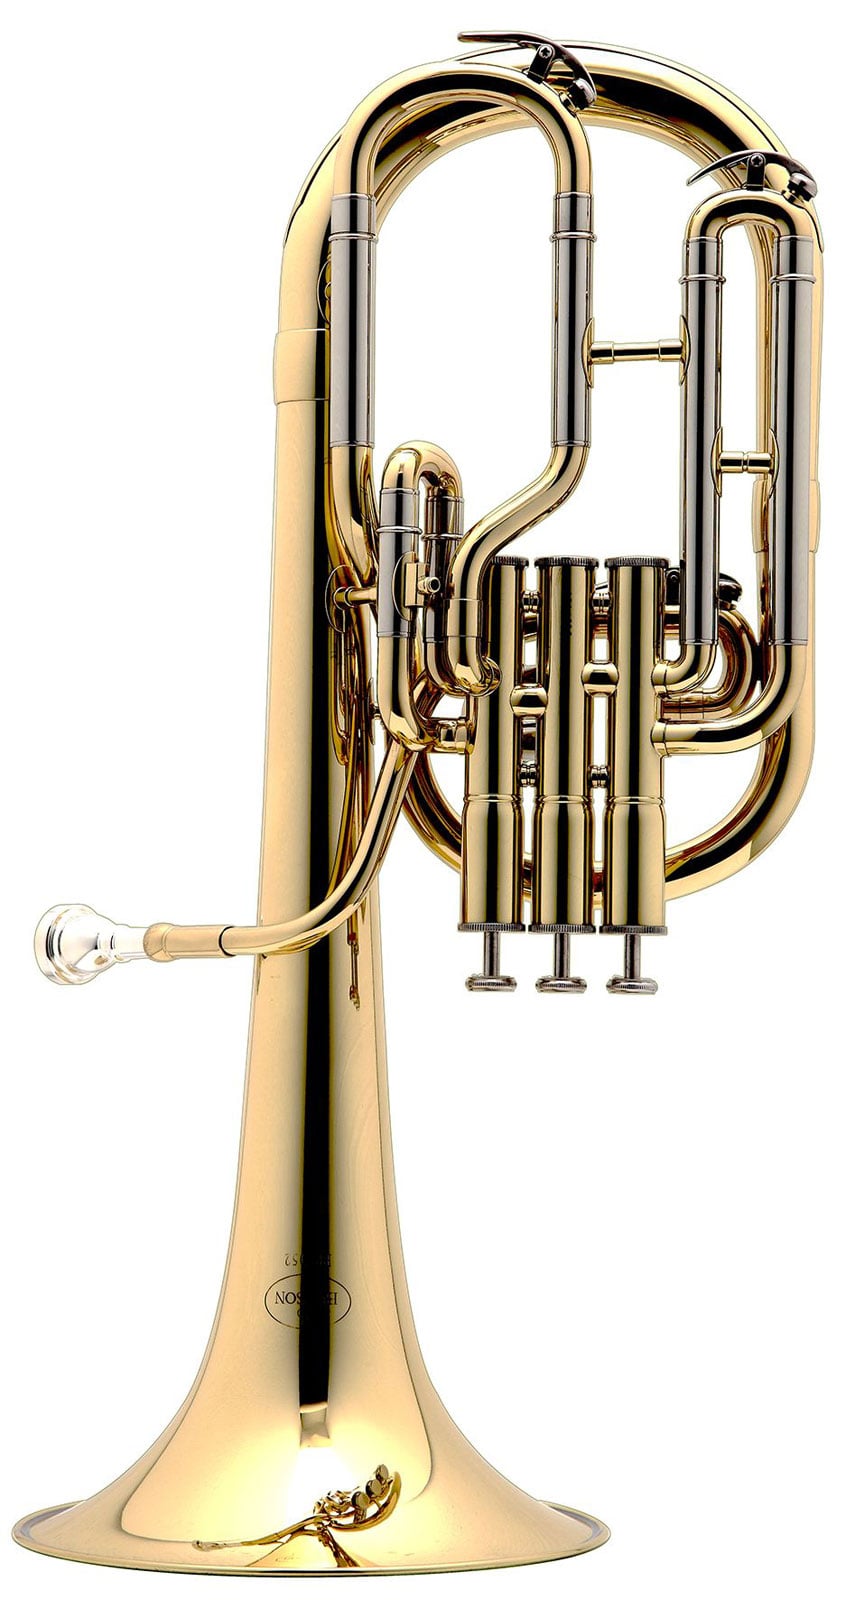 BESSON BE152-1-0 - PRODIGE TENOR HORN LACQUERED